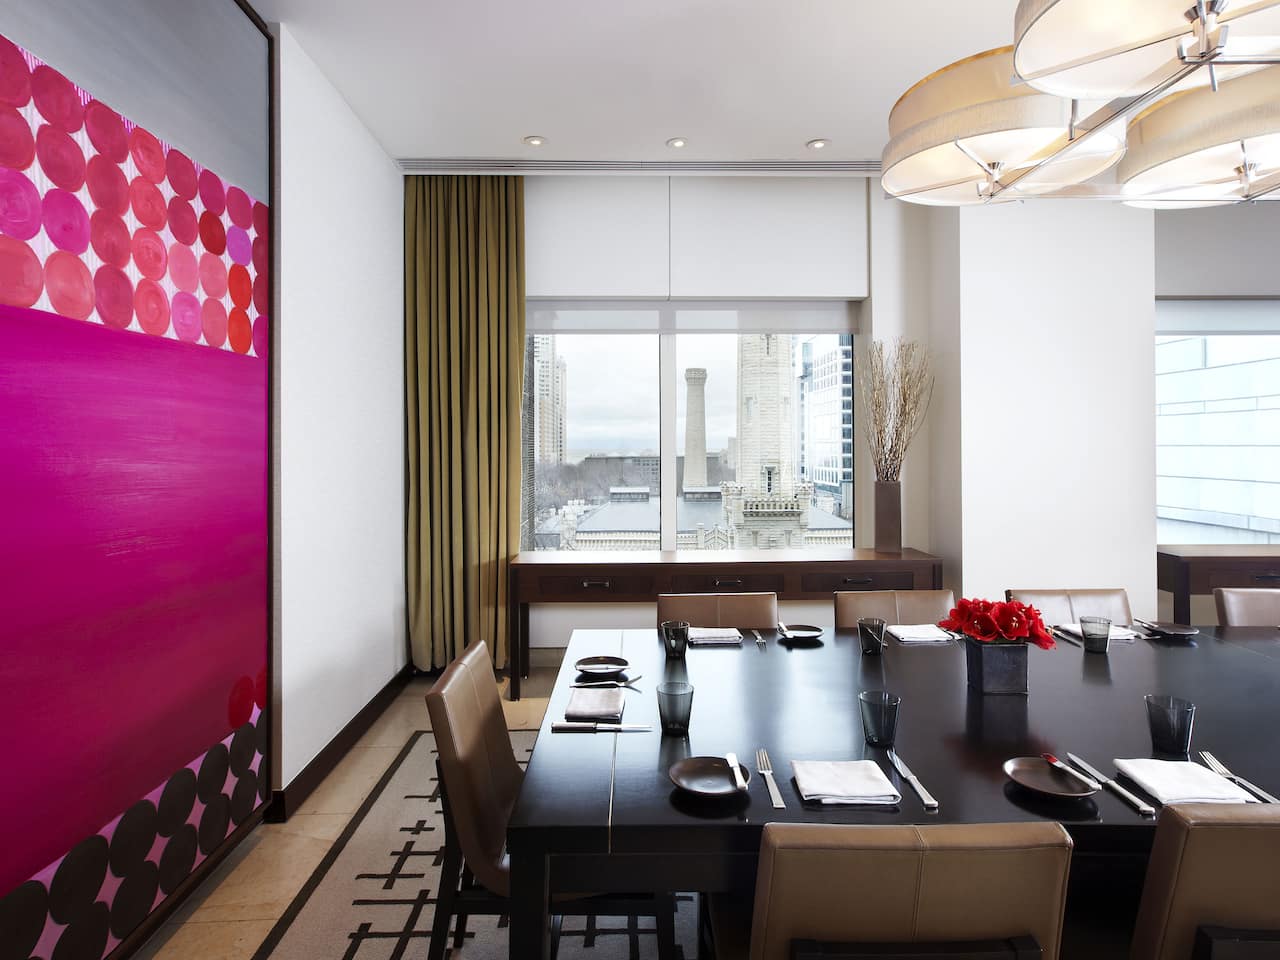 Private dining room with a lake view at a Downtown Chicago hotel